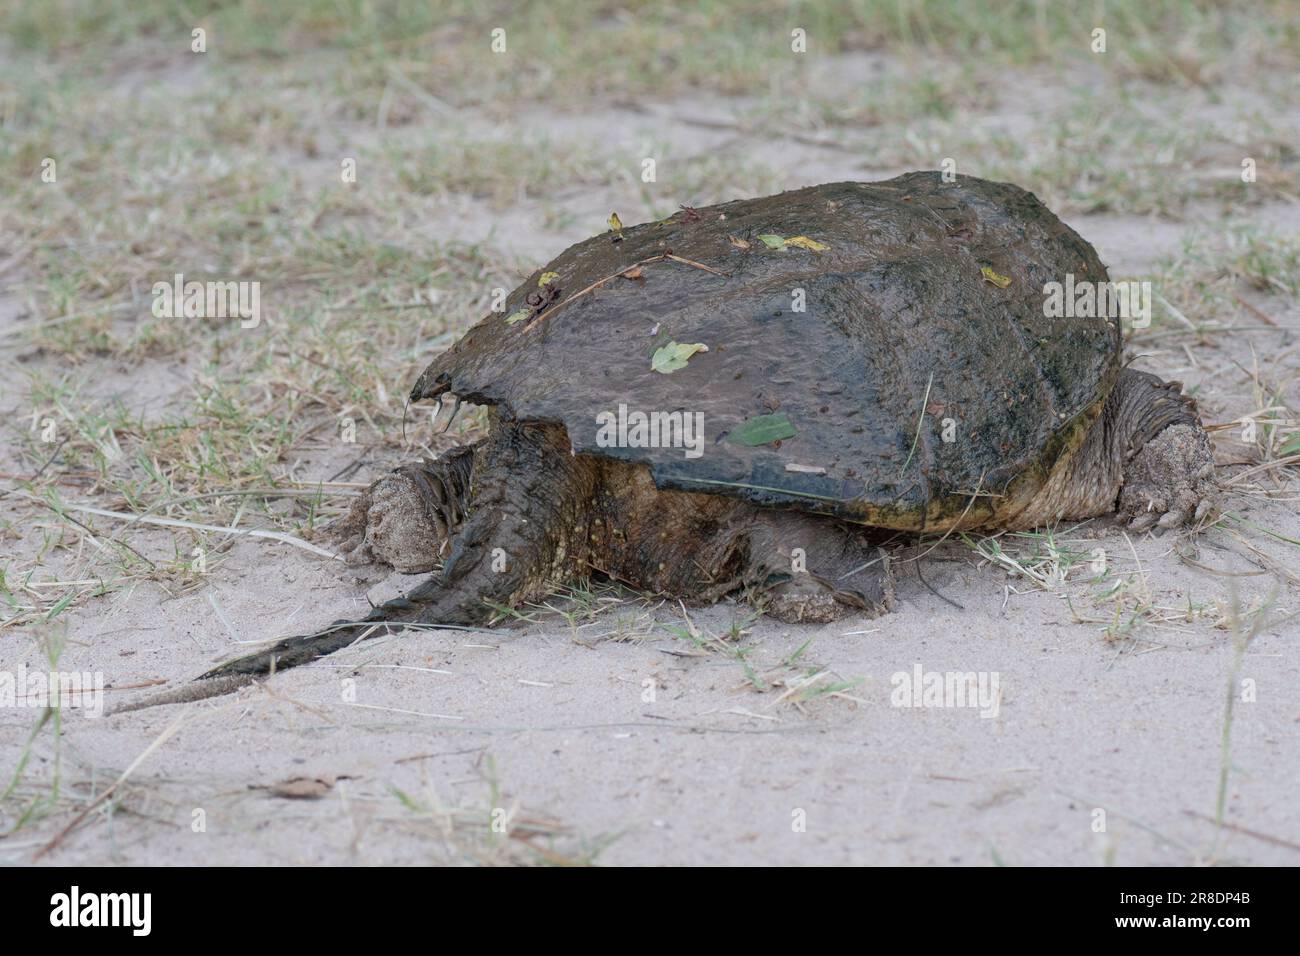 Side view of front and back legs and tail of a common snapping turtle, Chelydra serpentina. Stock Photo